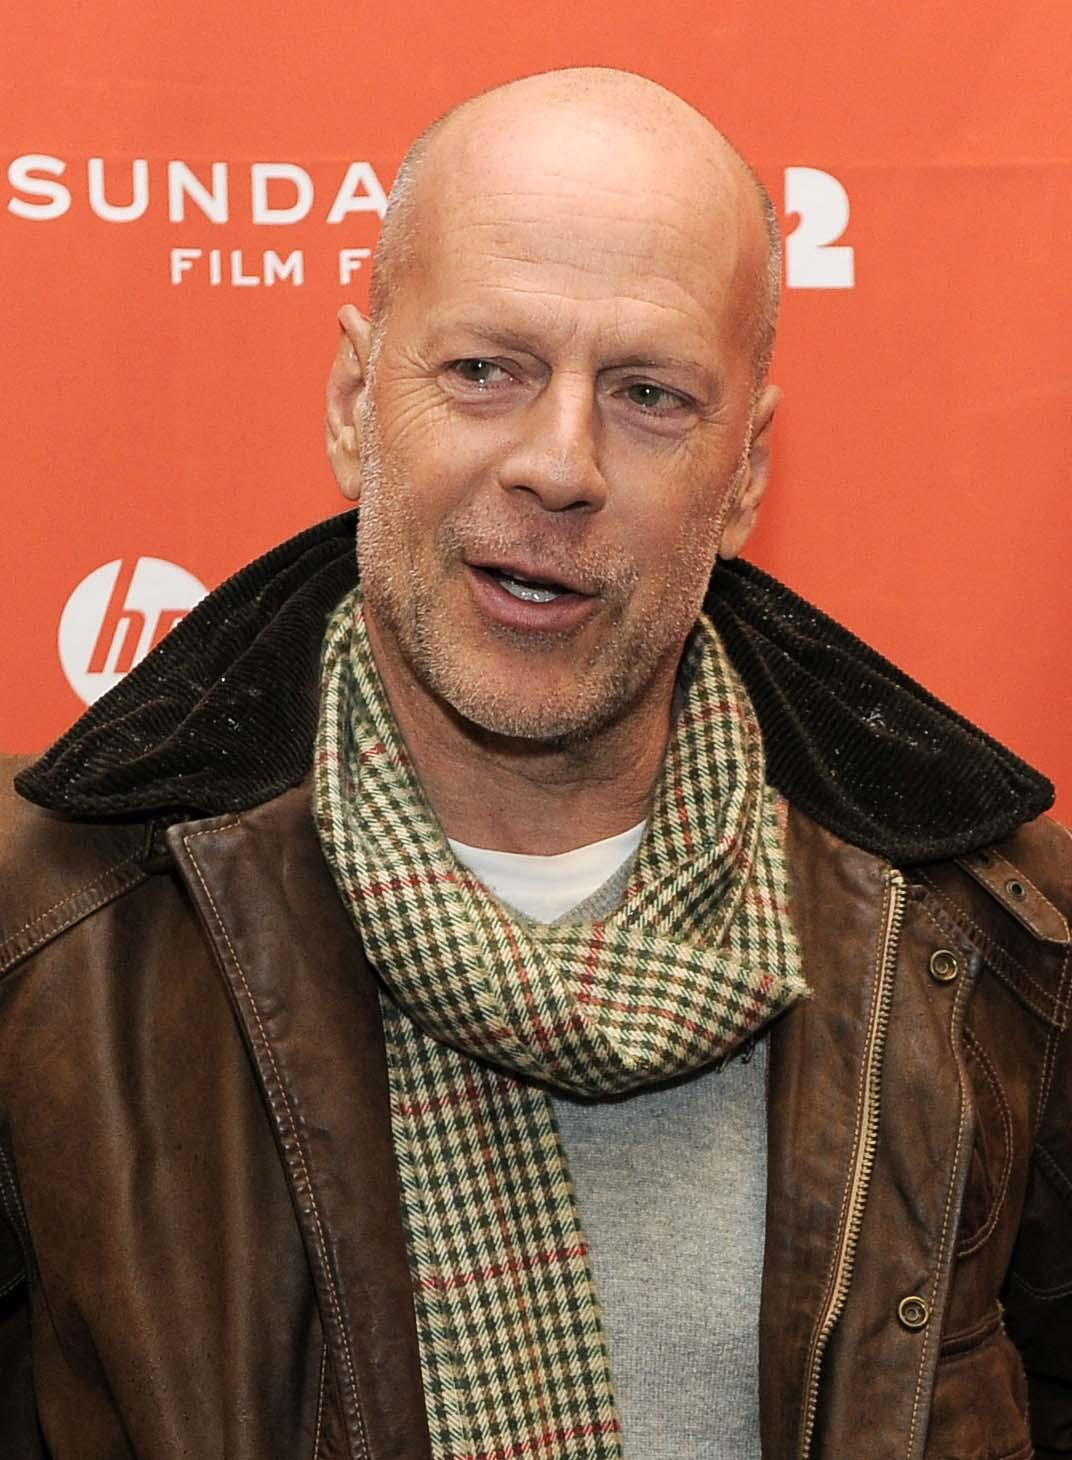 Bruce Willis Actor Profile and Latest Photographs | Hollywood1072 x 1460